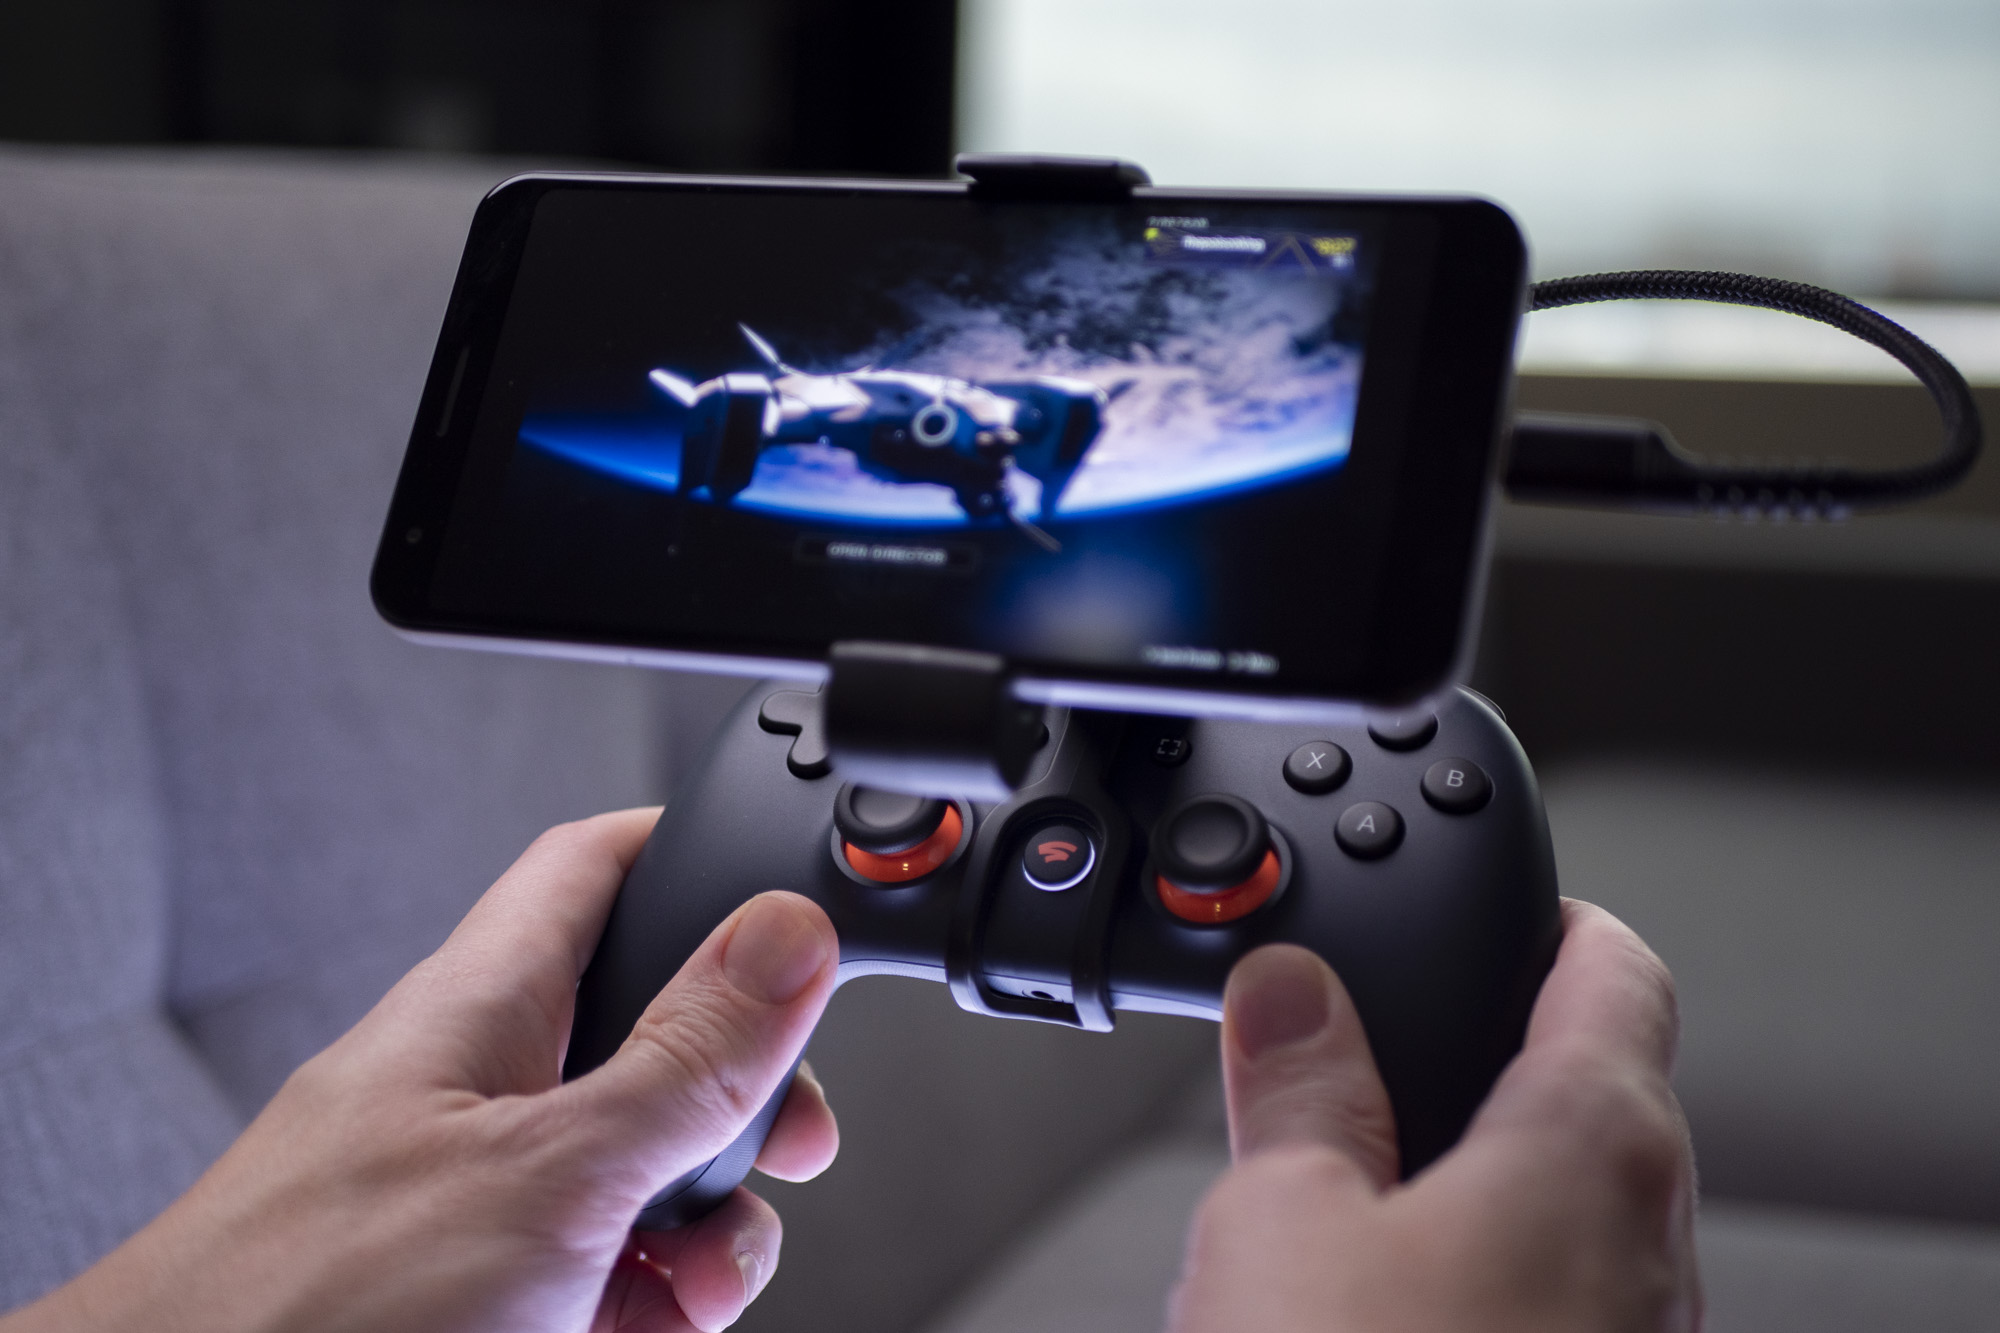 Google's latest gaming play could be within